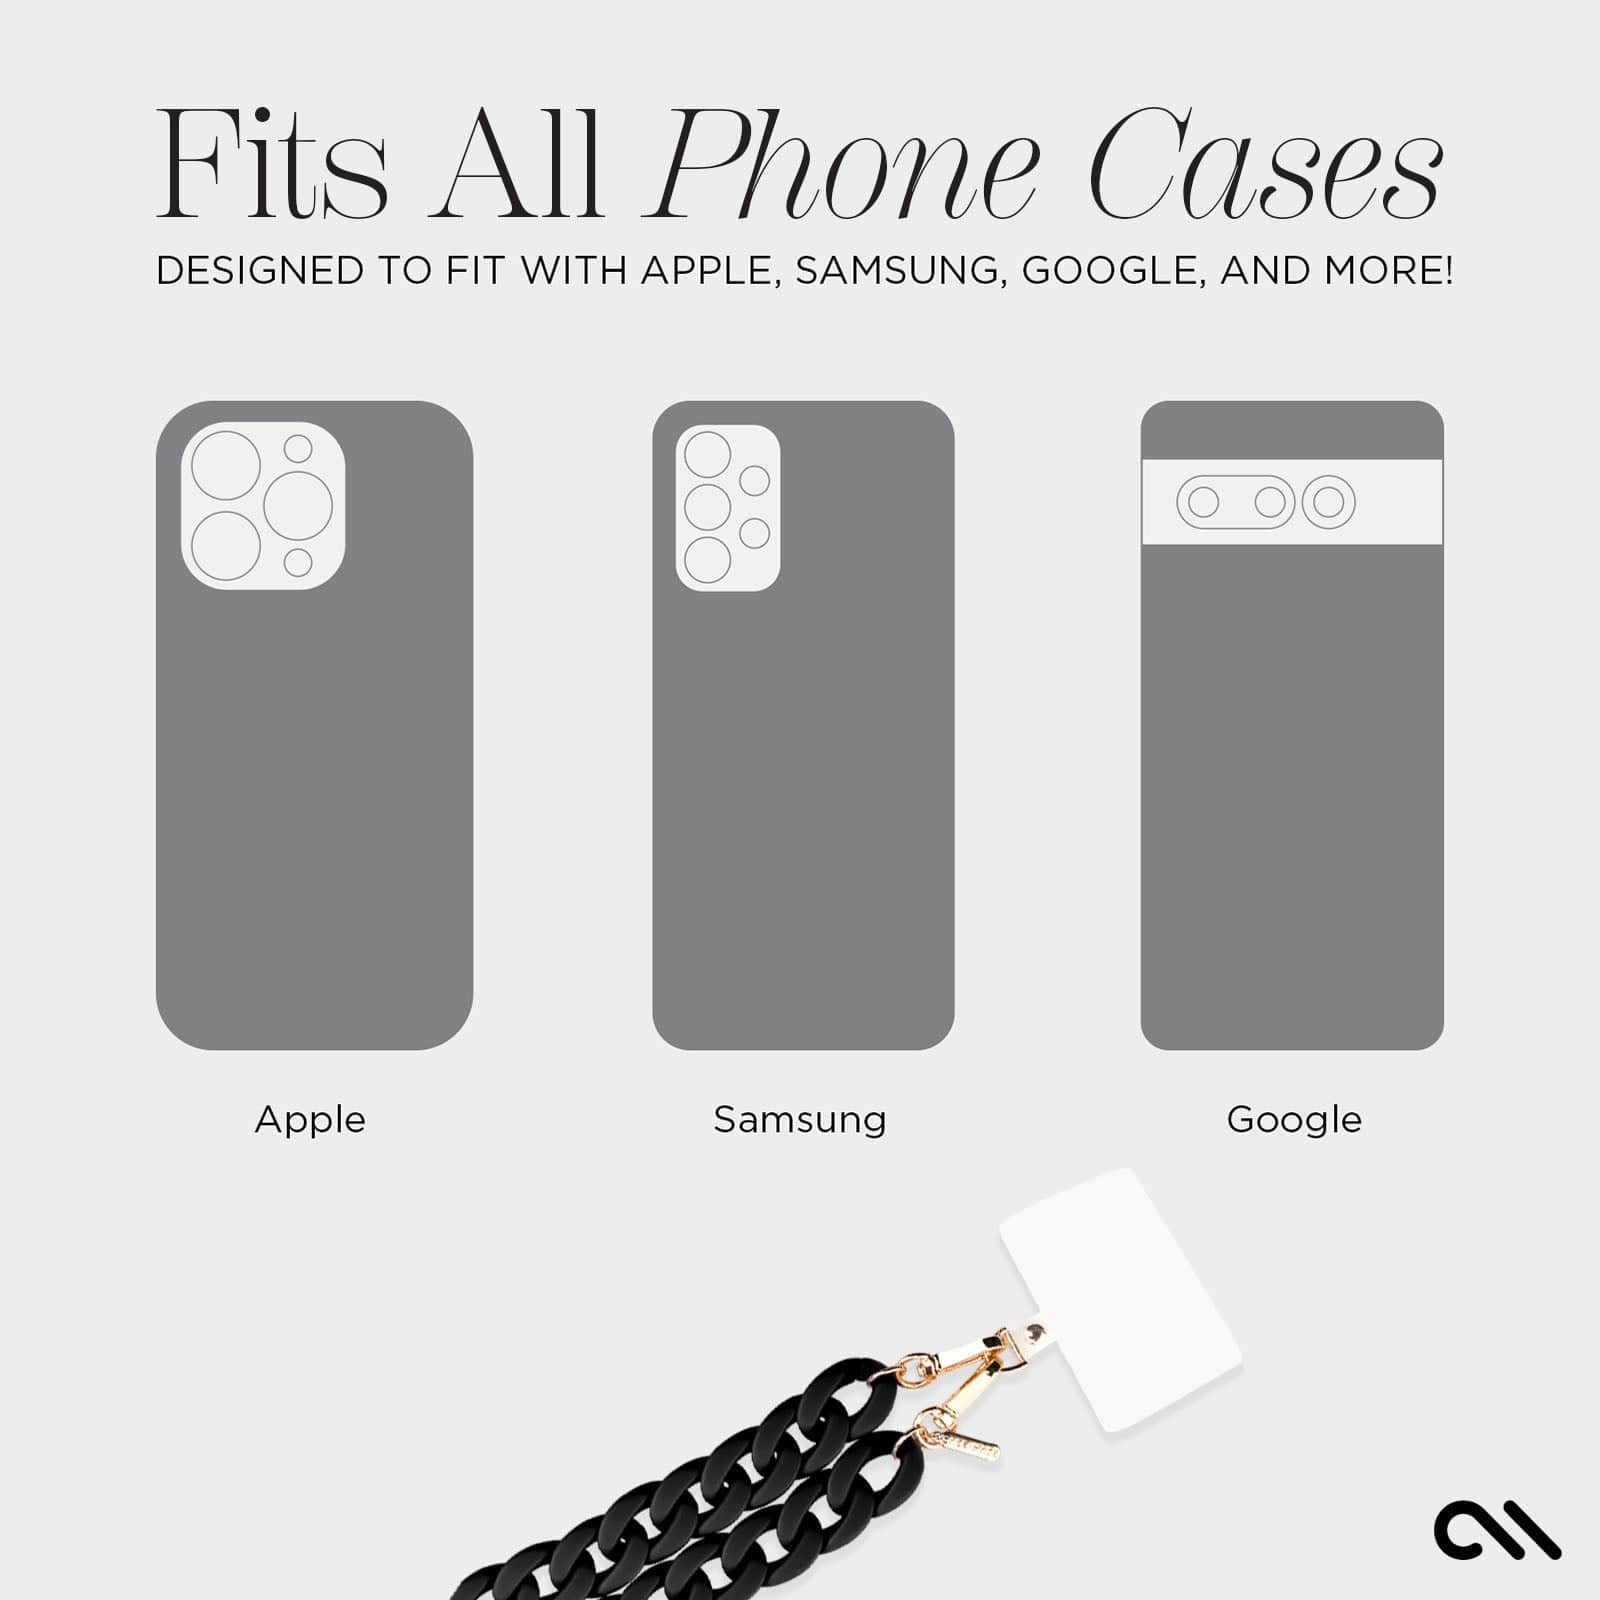 FITS ALL PHONE CASES